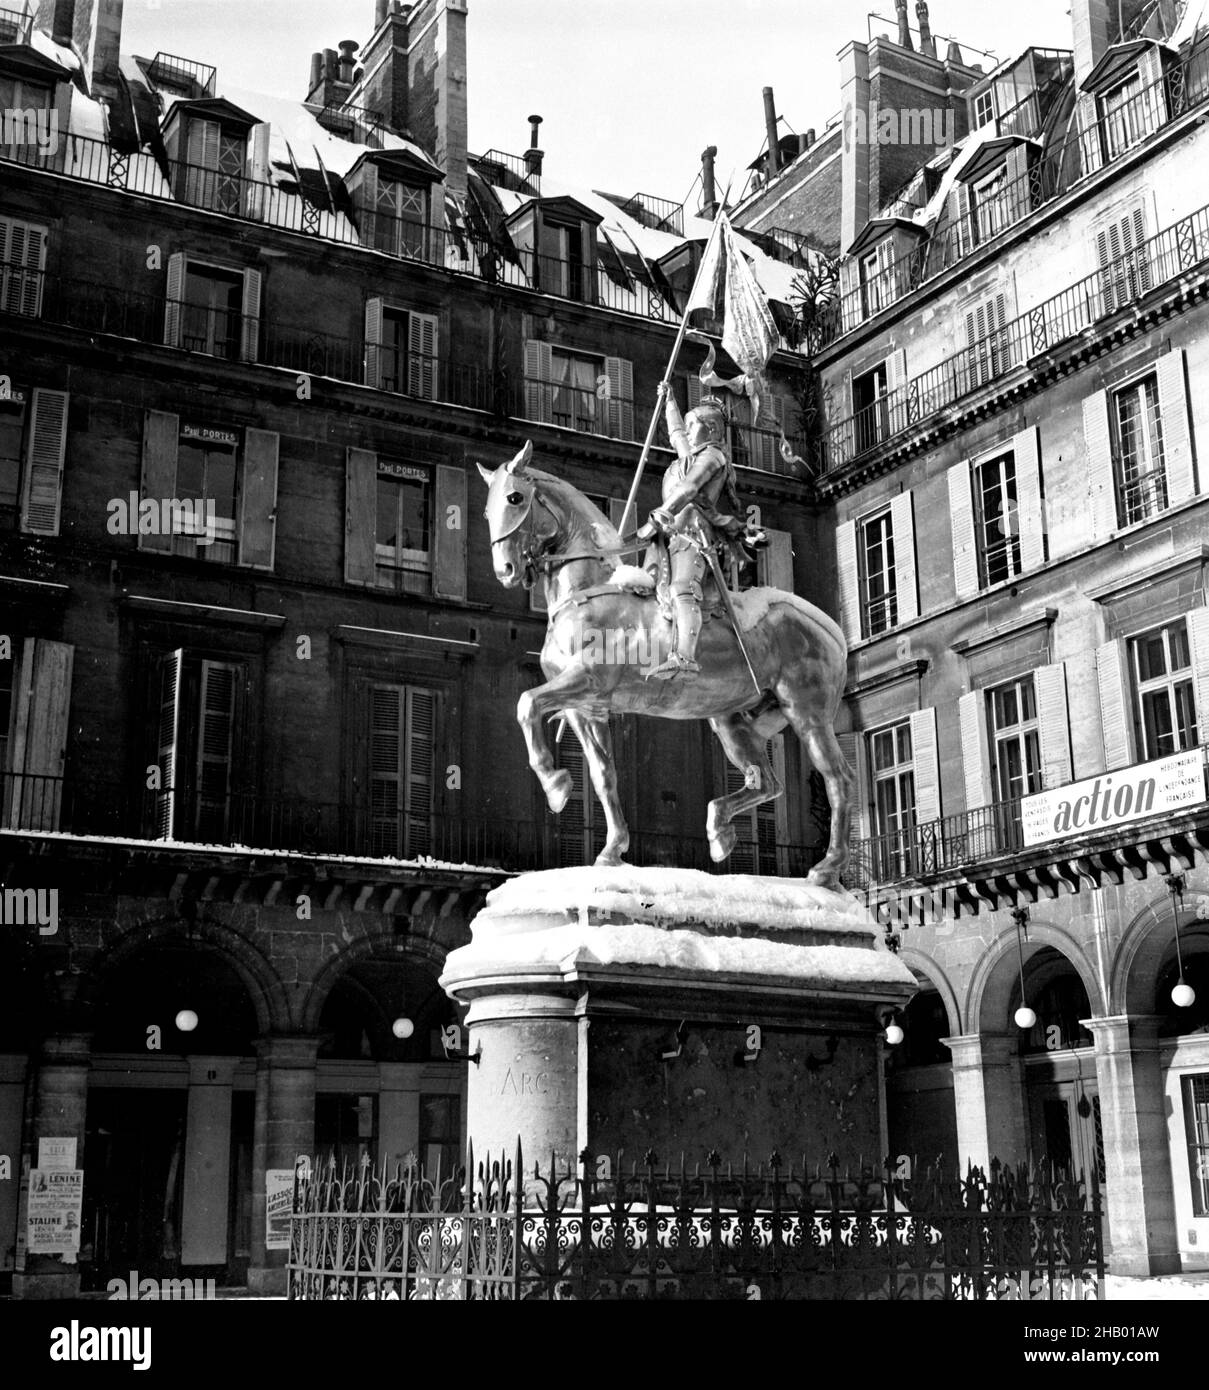 Paris Joan of Arc statue in snow in the Place des Pyramides, 1945. A photo of the bronze statue made by sculptor Emmanuel Fremiet and erected in 1874. Snow has accumulated on the back of the horse and atop the tall base that the statue sits on. There are no cars or people in this image and at first glance it might just look like a contemporary photo done in black and white. But a closer study reveals old shutters around more of the windows in the square as well as some period advertising and posted bills. A banner promotes a weekly journal called “Action”. Stock Photo